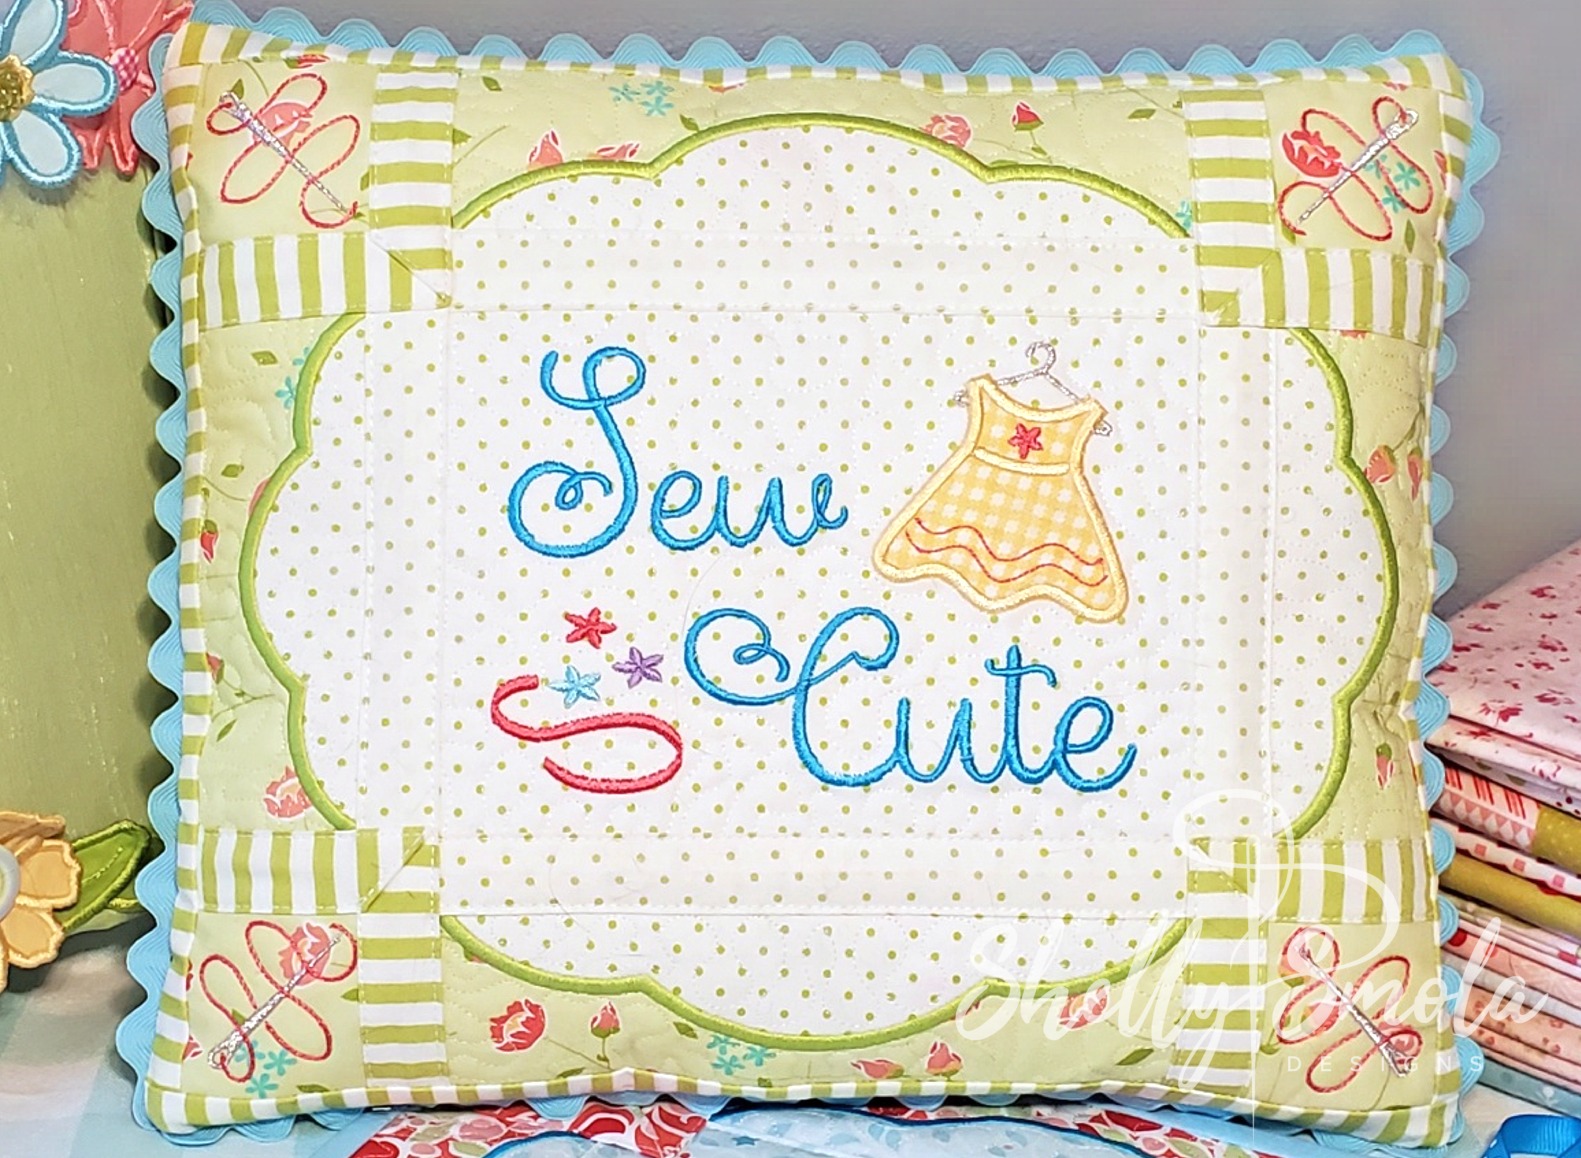 Sew Cute PIllow by Shelly Smola